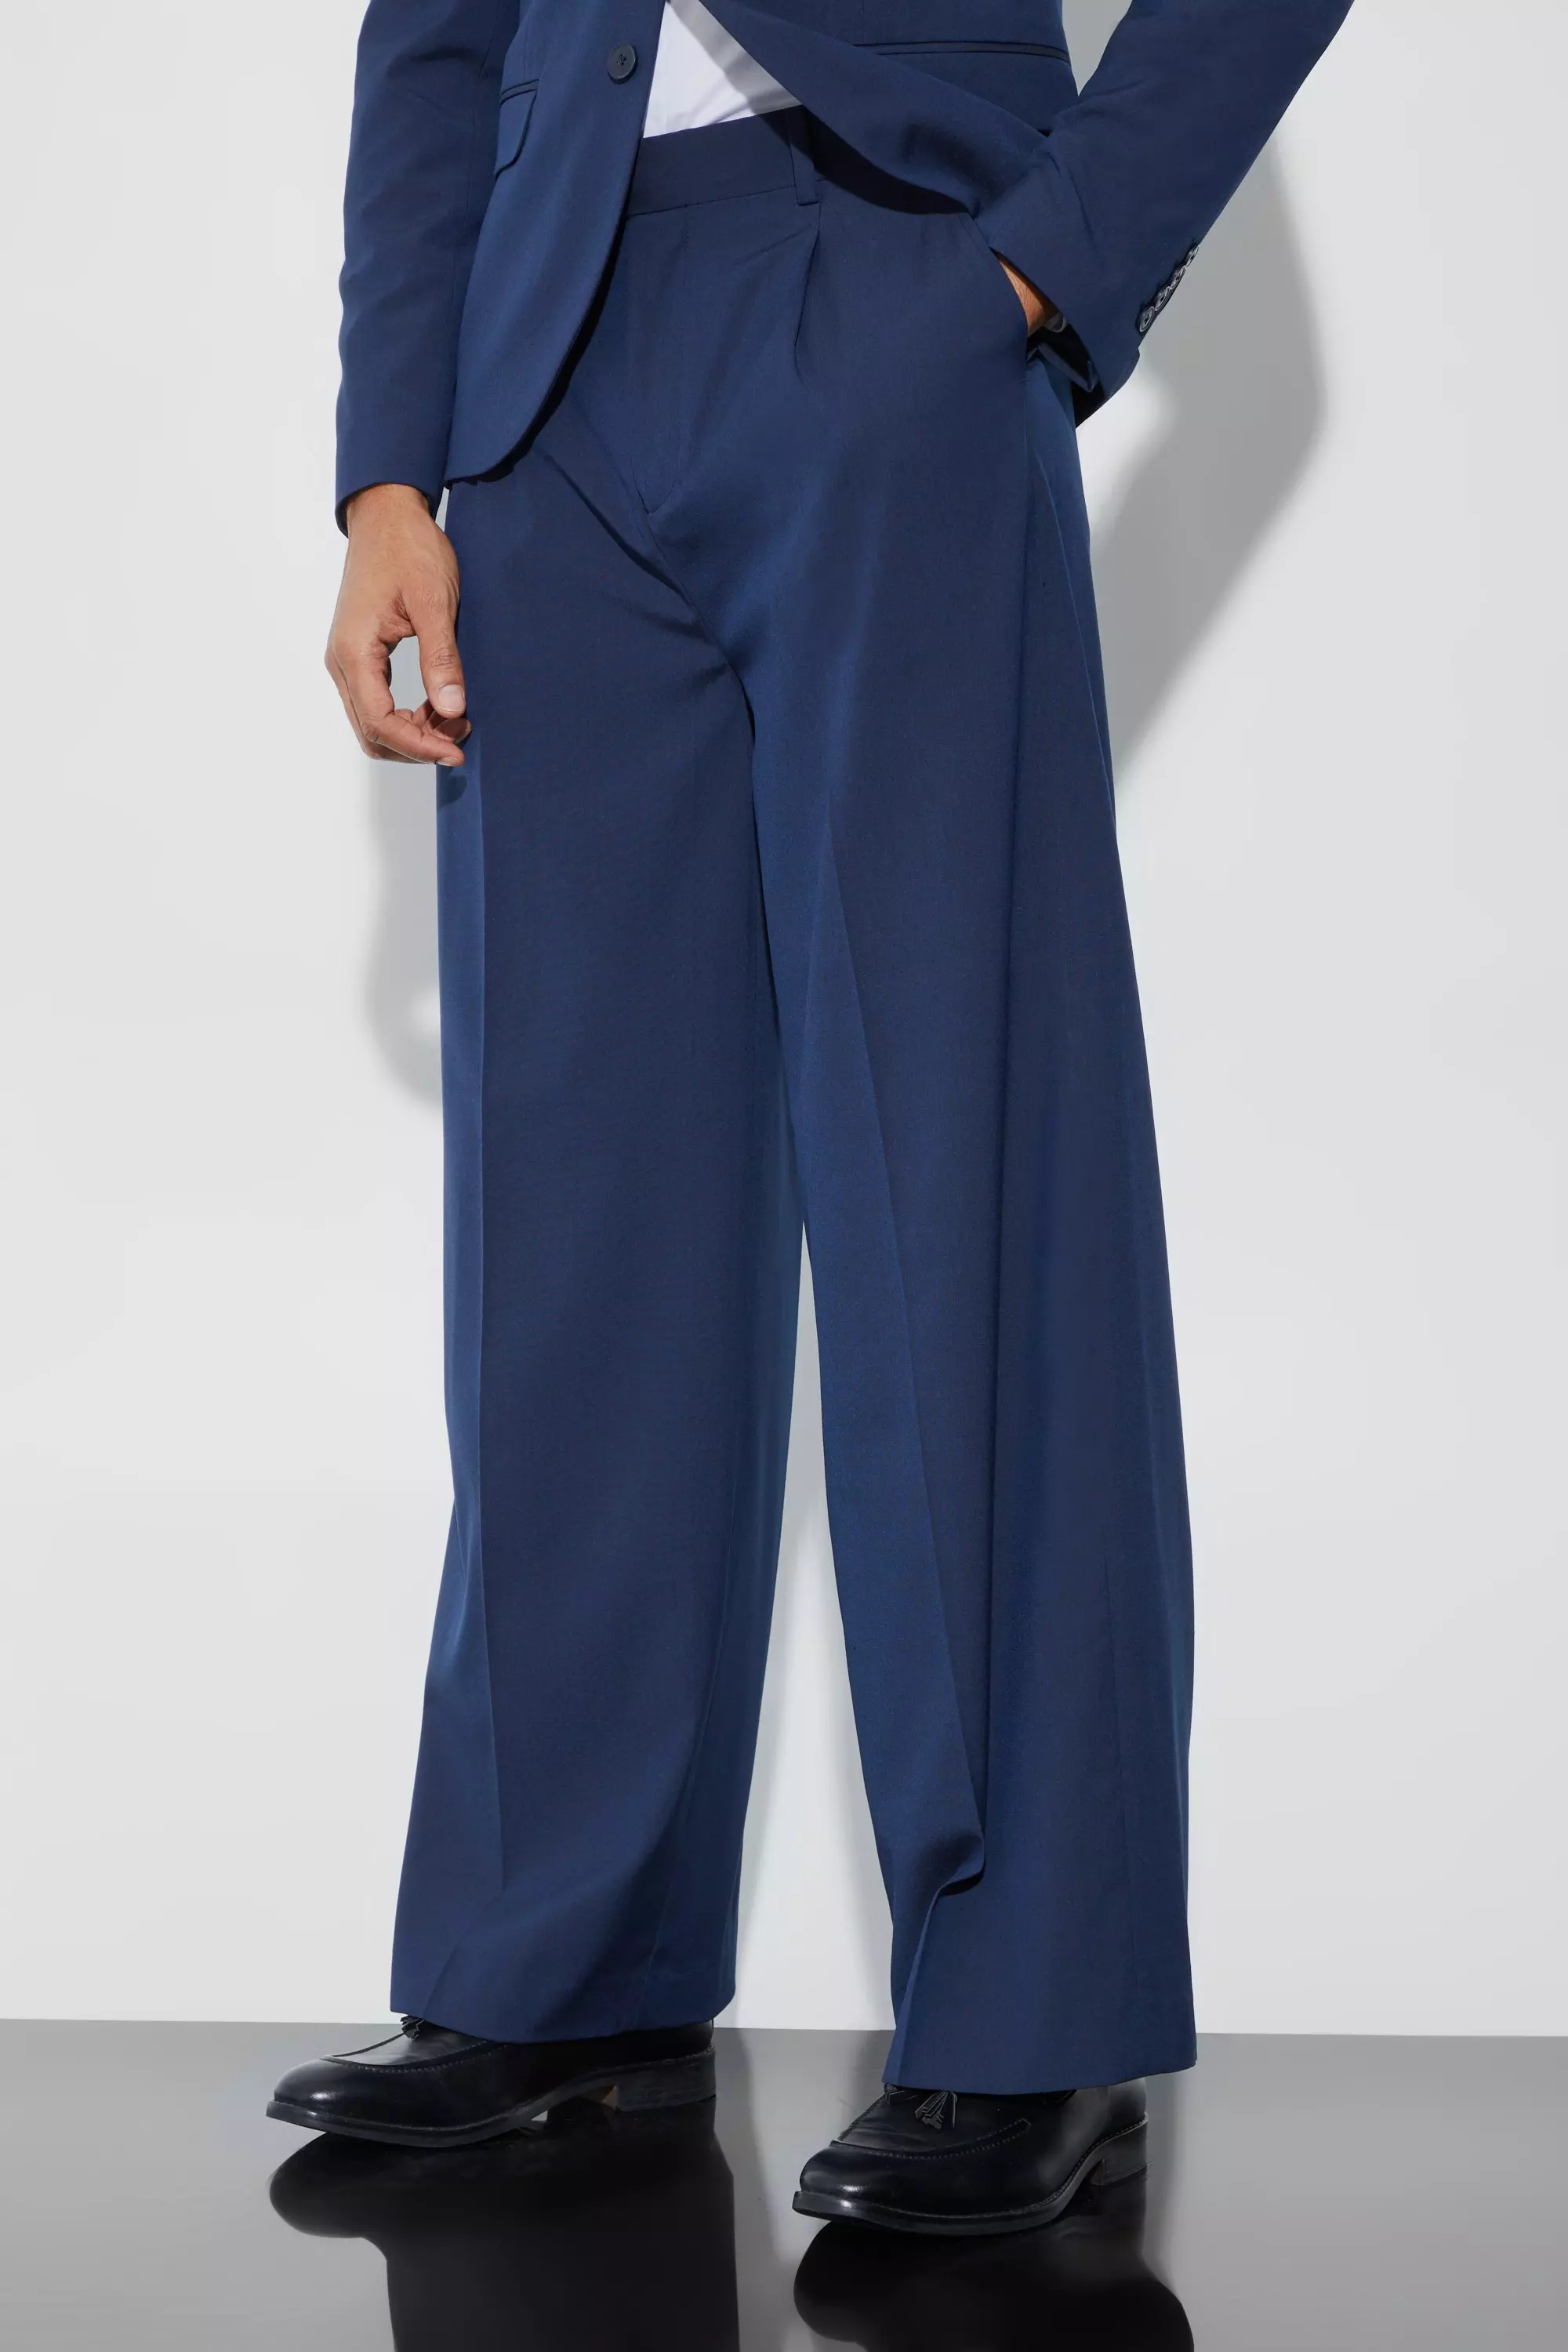 Navy Extra Wide Fit Pleat Front Tailored Pants